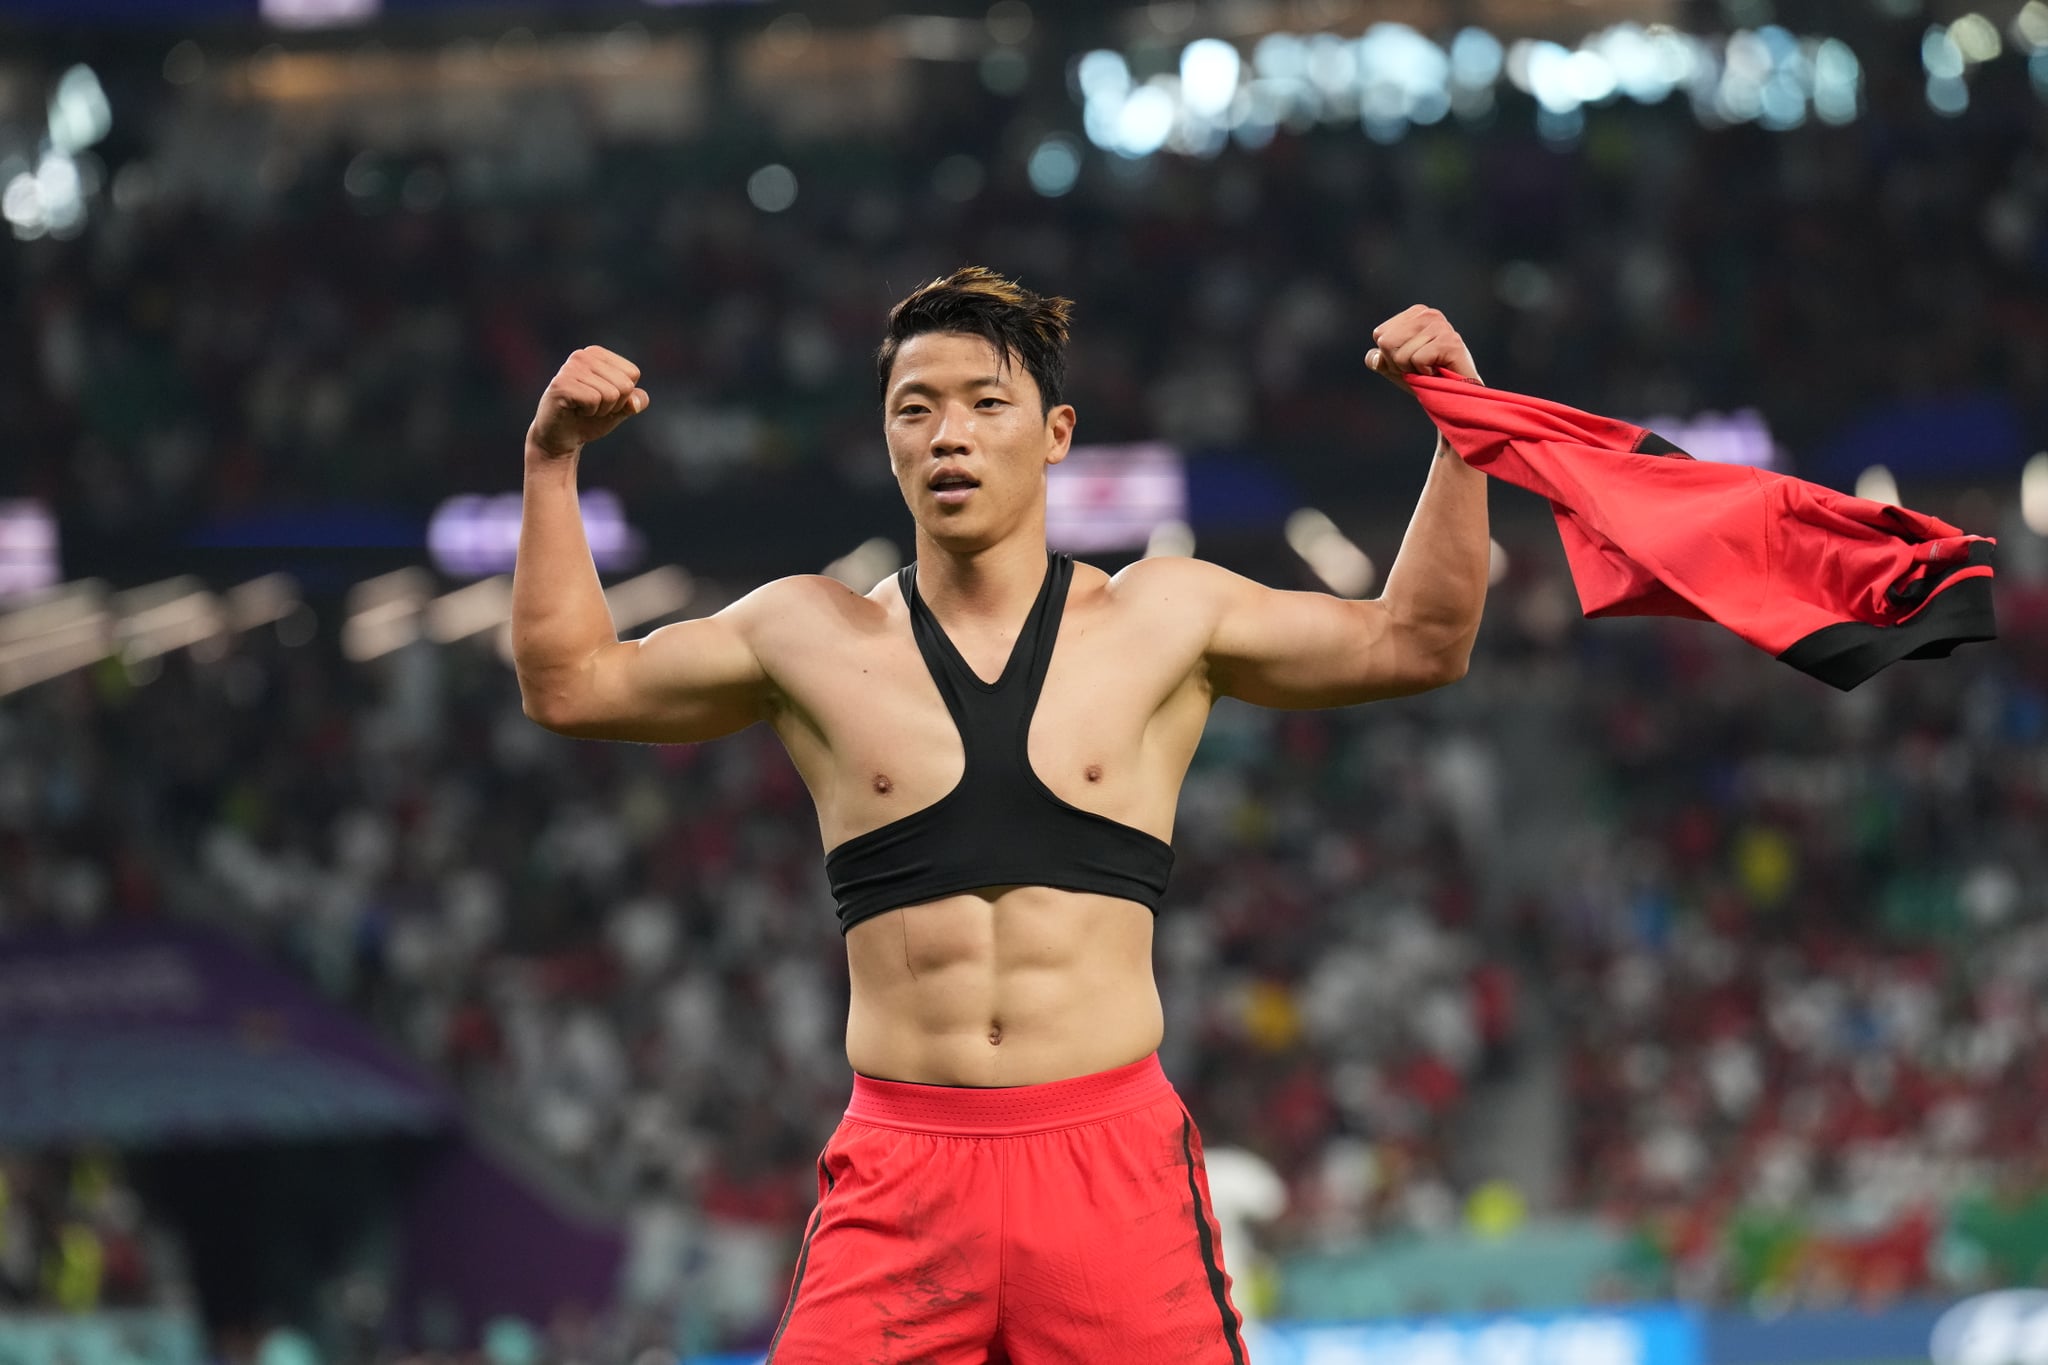 AL RAYYAN, QATAR - DECEMBER 02: Hwang Hee-chan of Korea celebrates after scoring their second goal during the FIFA World Cup Qatar 2022 Group H match between Korea Republic and Portugal at Education City Stadium on December 02, 2022 in Al Rayyan, Qatar. (Photo by Amin Mohammad Jamali/Getty Images)